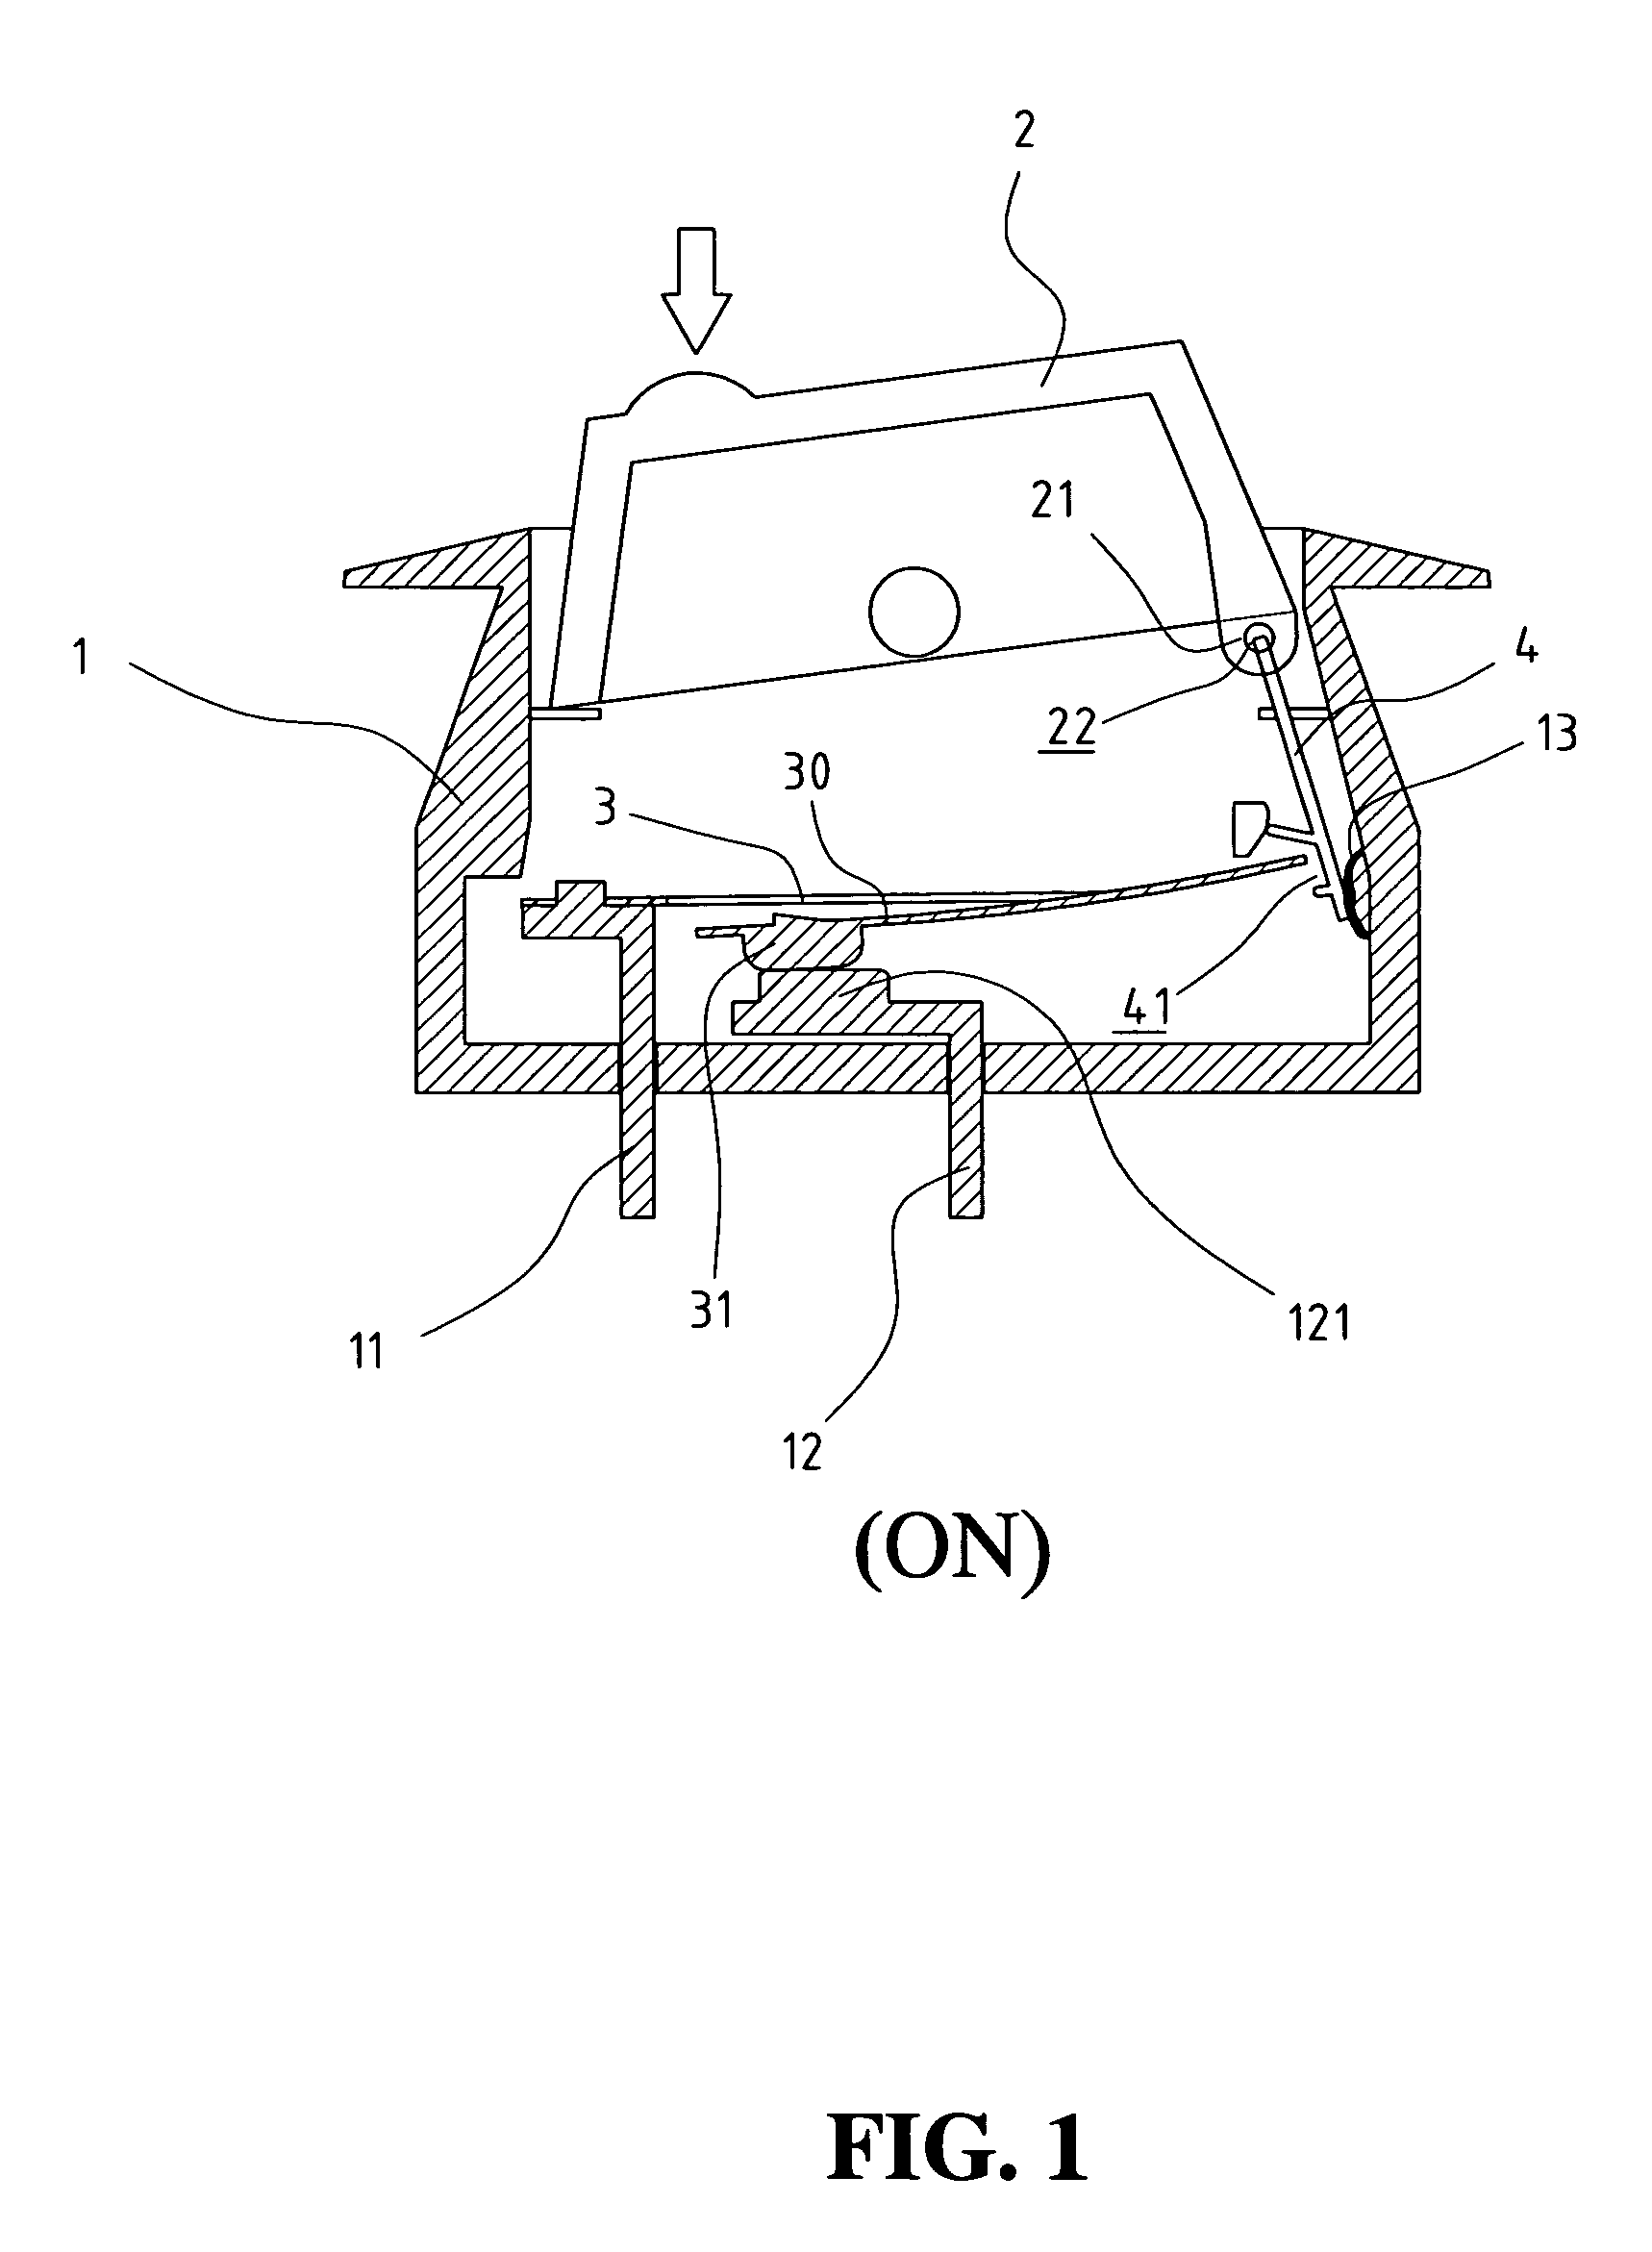 Mechanism for trip-free of the bimetallic plate of a safety switch device